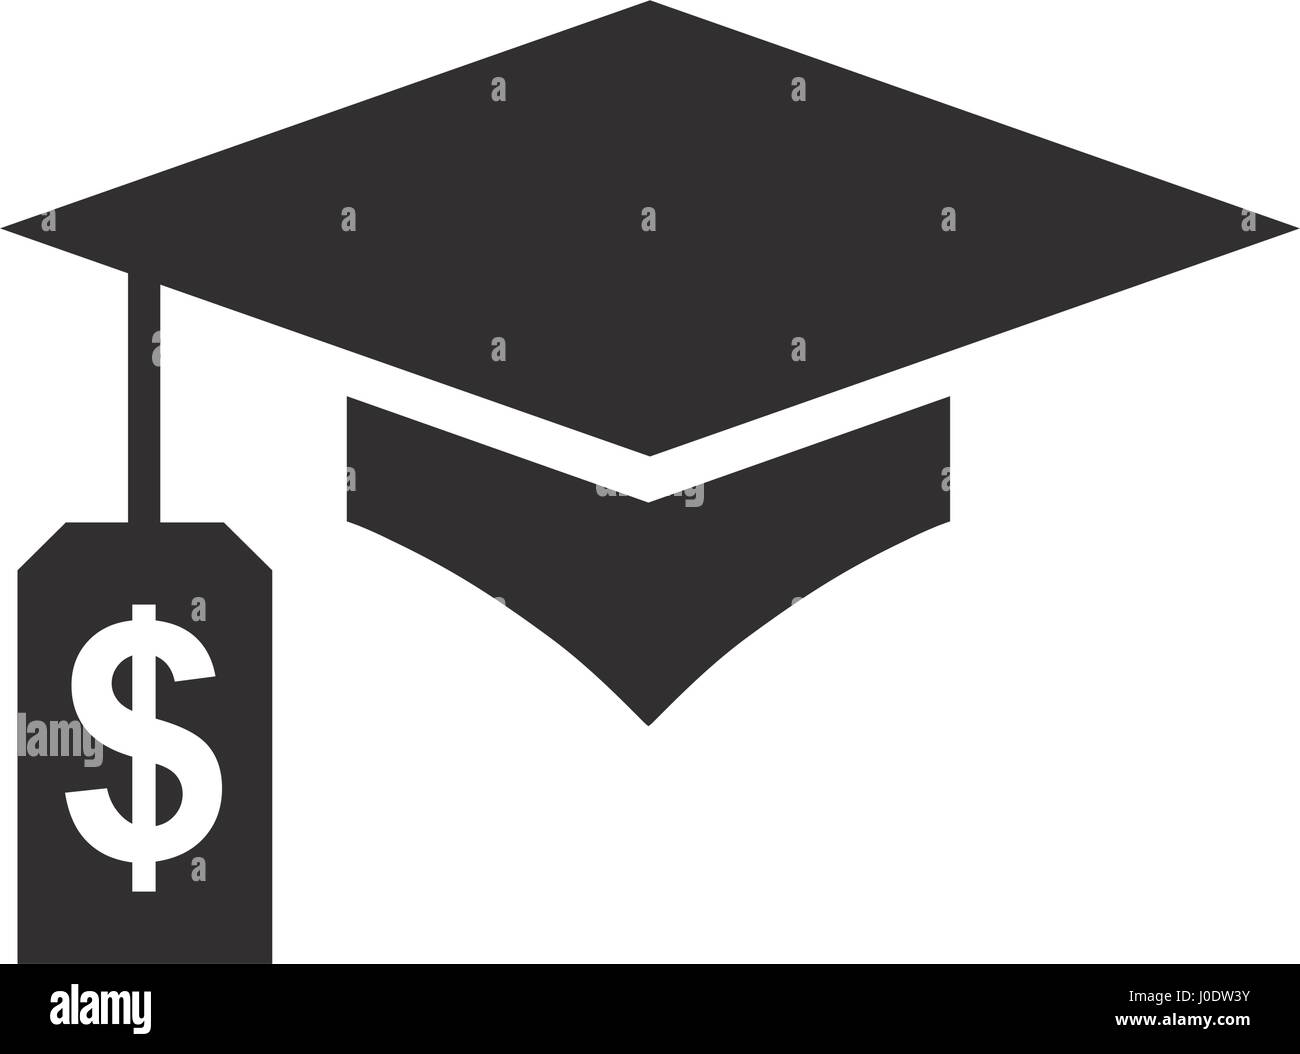 Graduate Student Loan Icon - Student Loan Graphics for Education Financial Aid or Assistance, Government Loans, & Debt Stock Vector